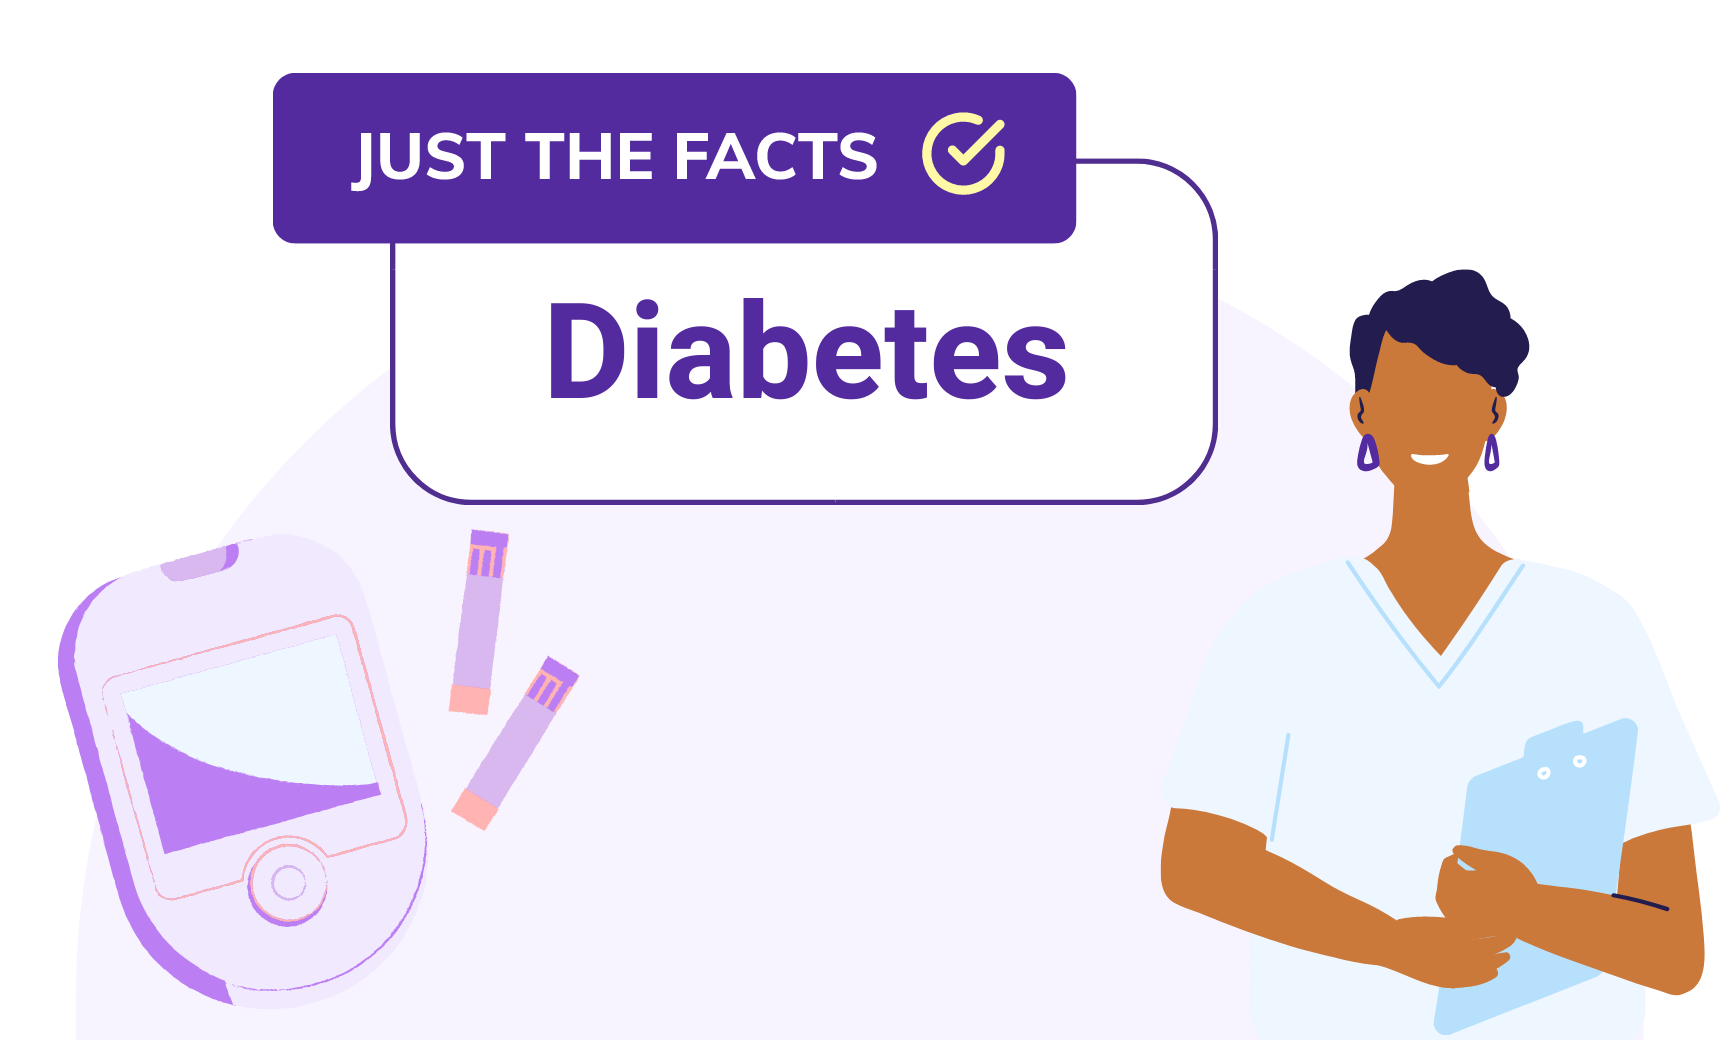 Just the Facts: Diabetes